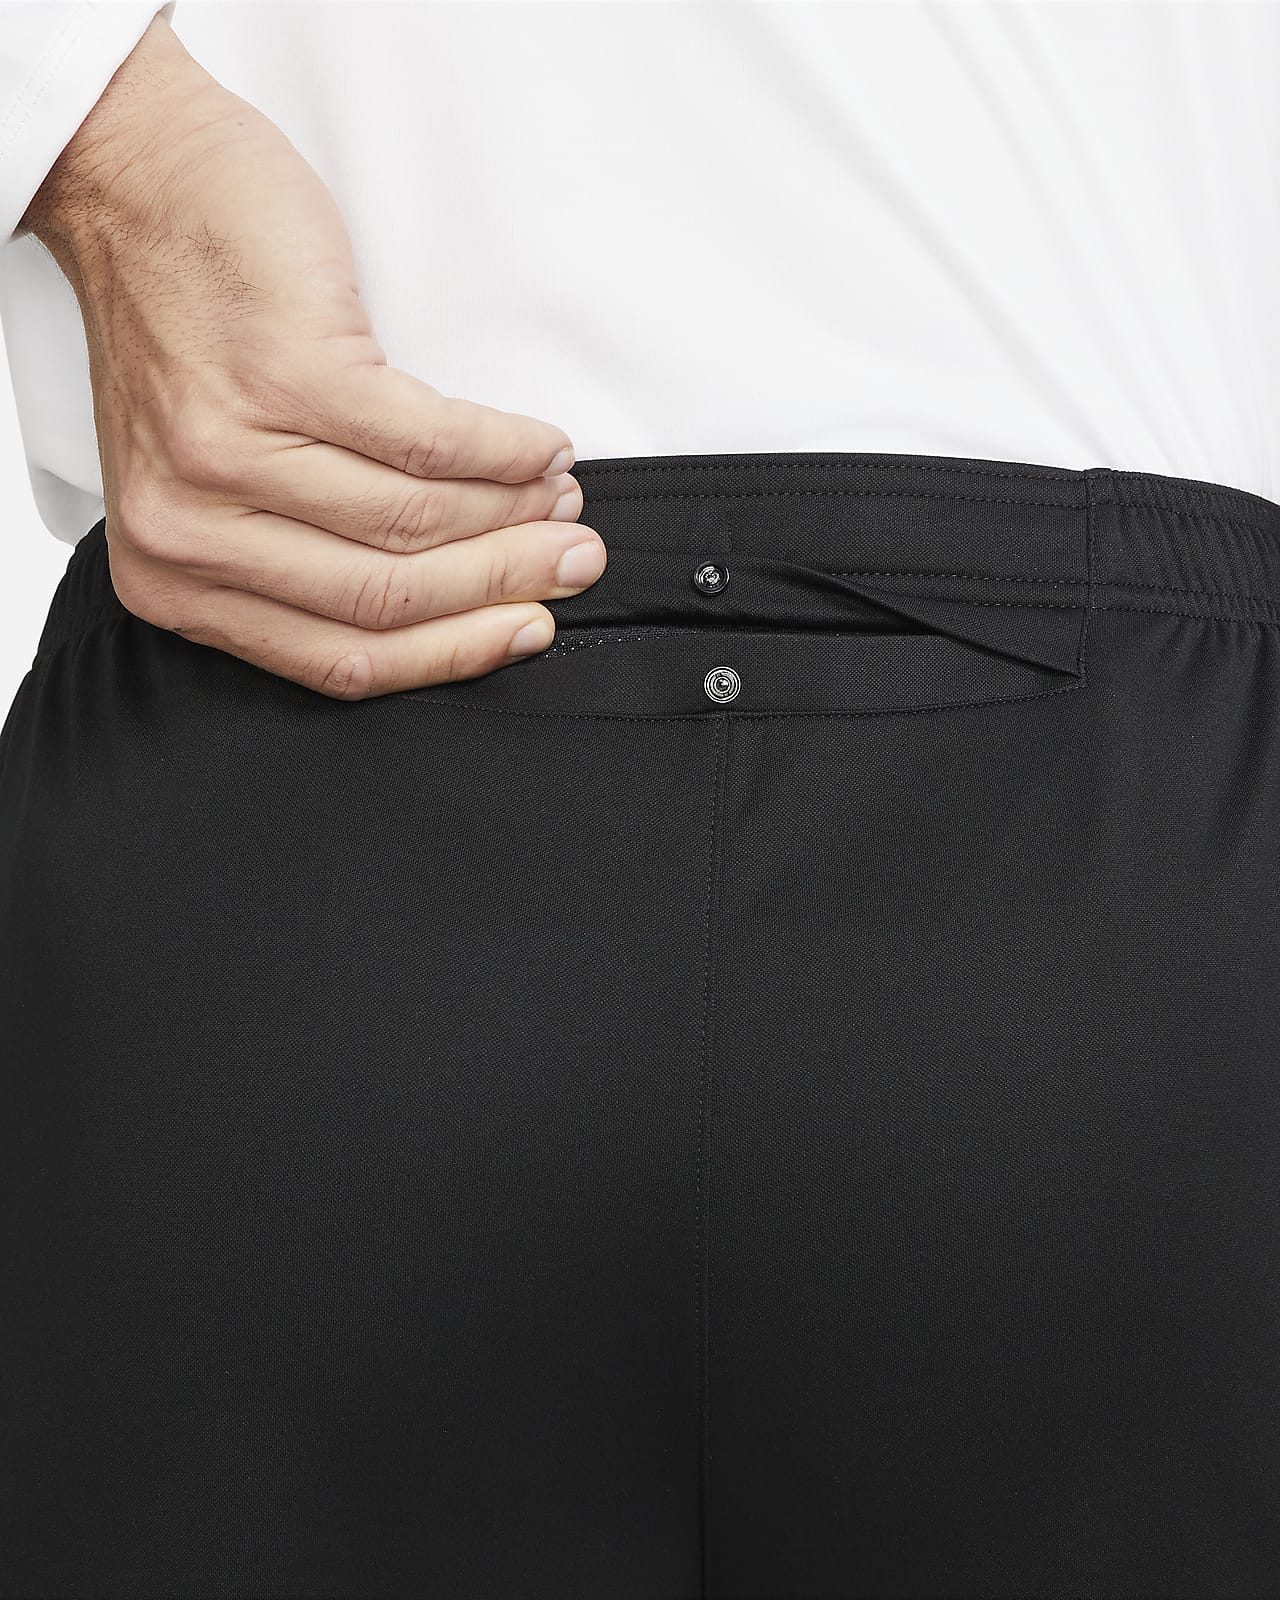 Nike Therma-FIT Repel Challenger Men's Running Trousers. Nike LU